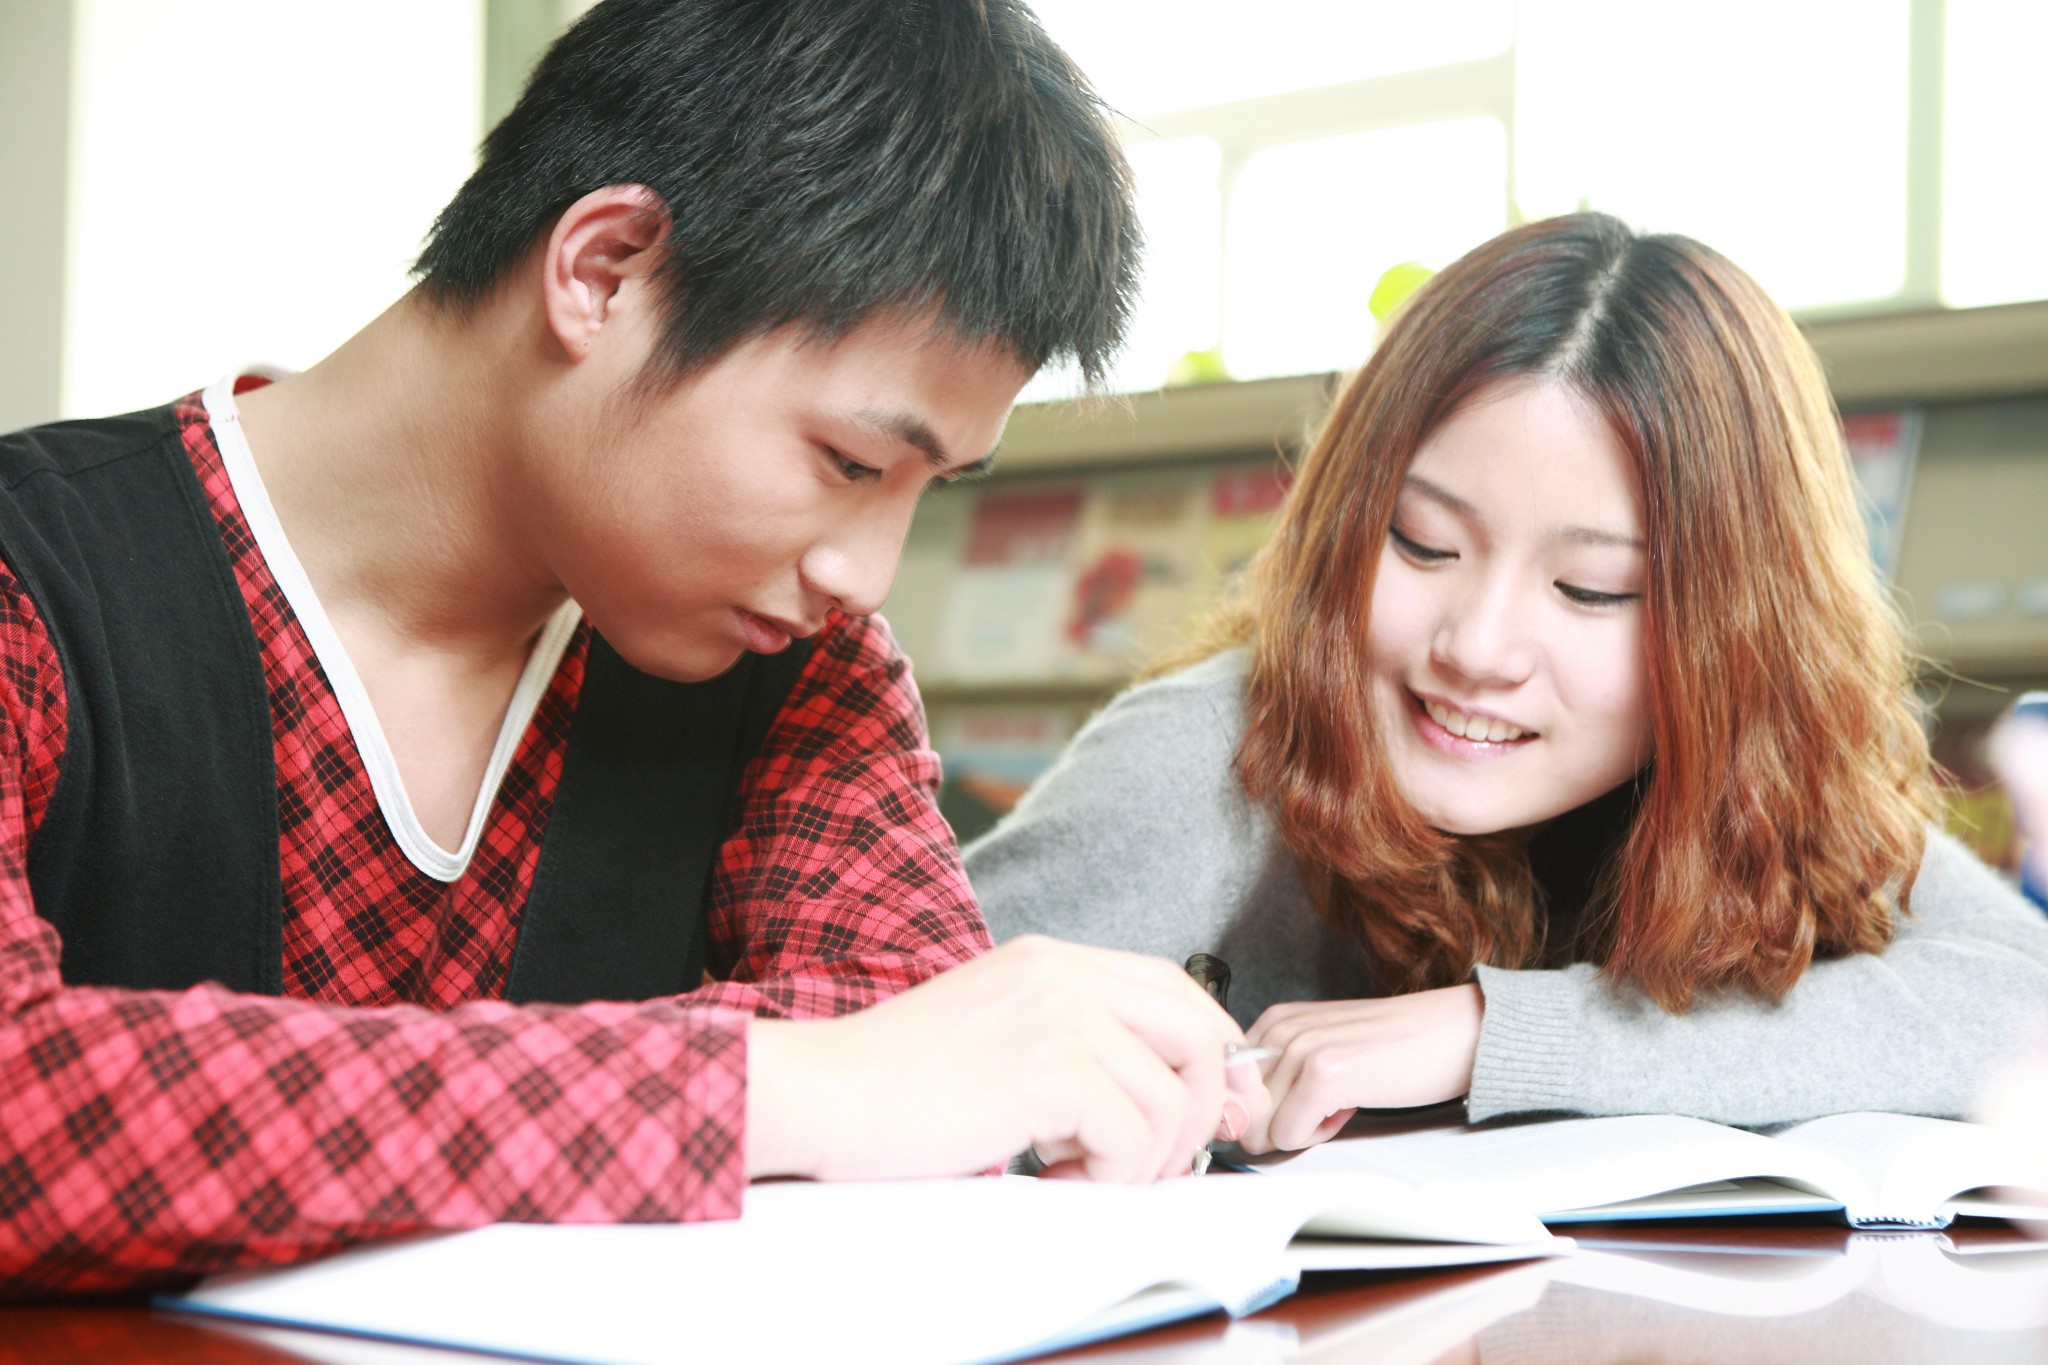 10 free ways to prepare for your IELTS exam